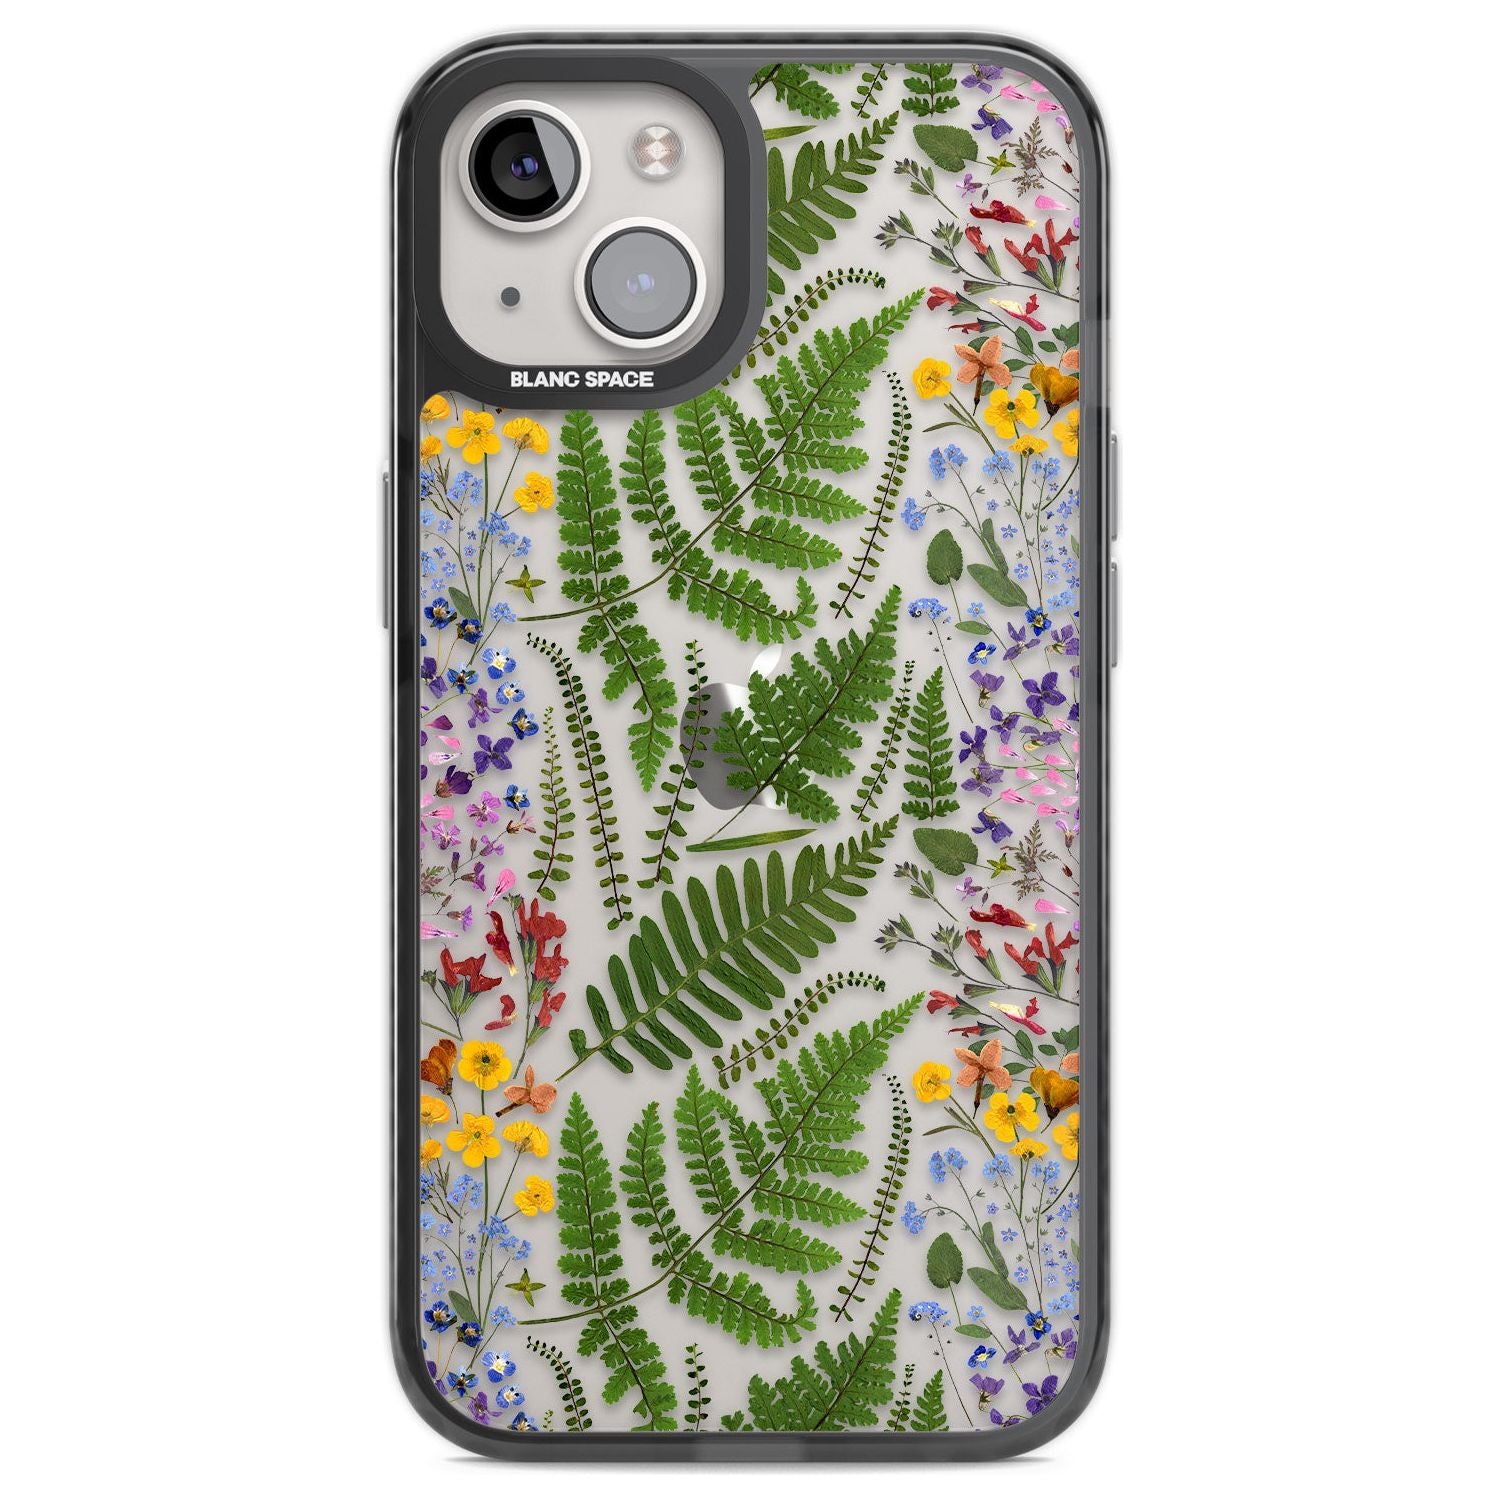 Busy Floral and Fern Design Phone Case iPhone 12 / Black Impact Case,iPhone 13 / Black Impact Case,iPhone 12 Pro / Black Impact Case,iPhone 14 / Black Impact Case,iPhone 15 Plus / Black Impact Case,iPhone 15 / Black Impact Case Blanc Space